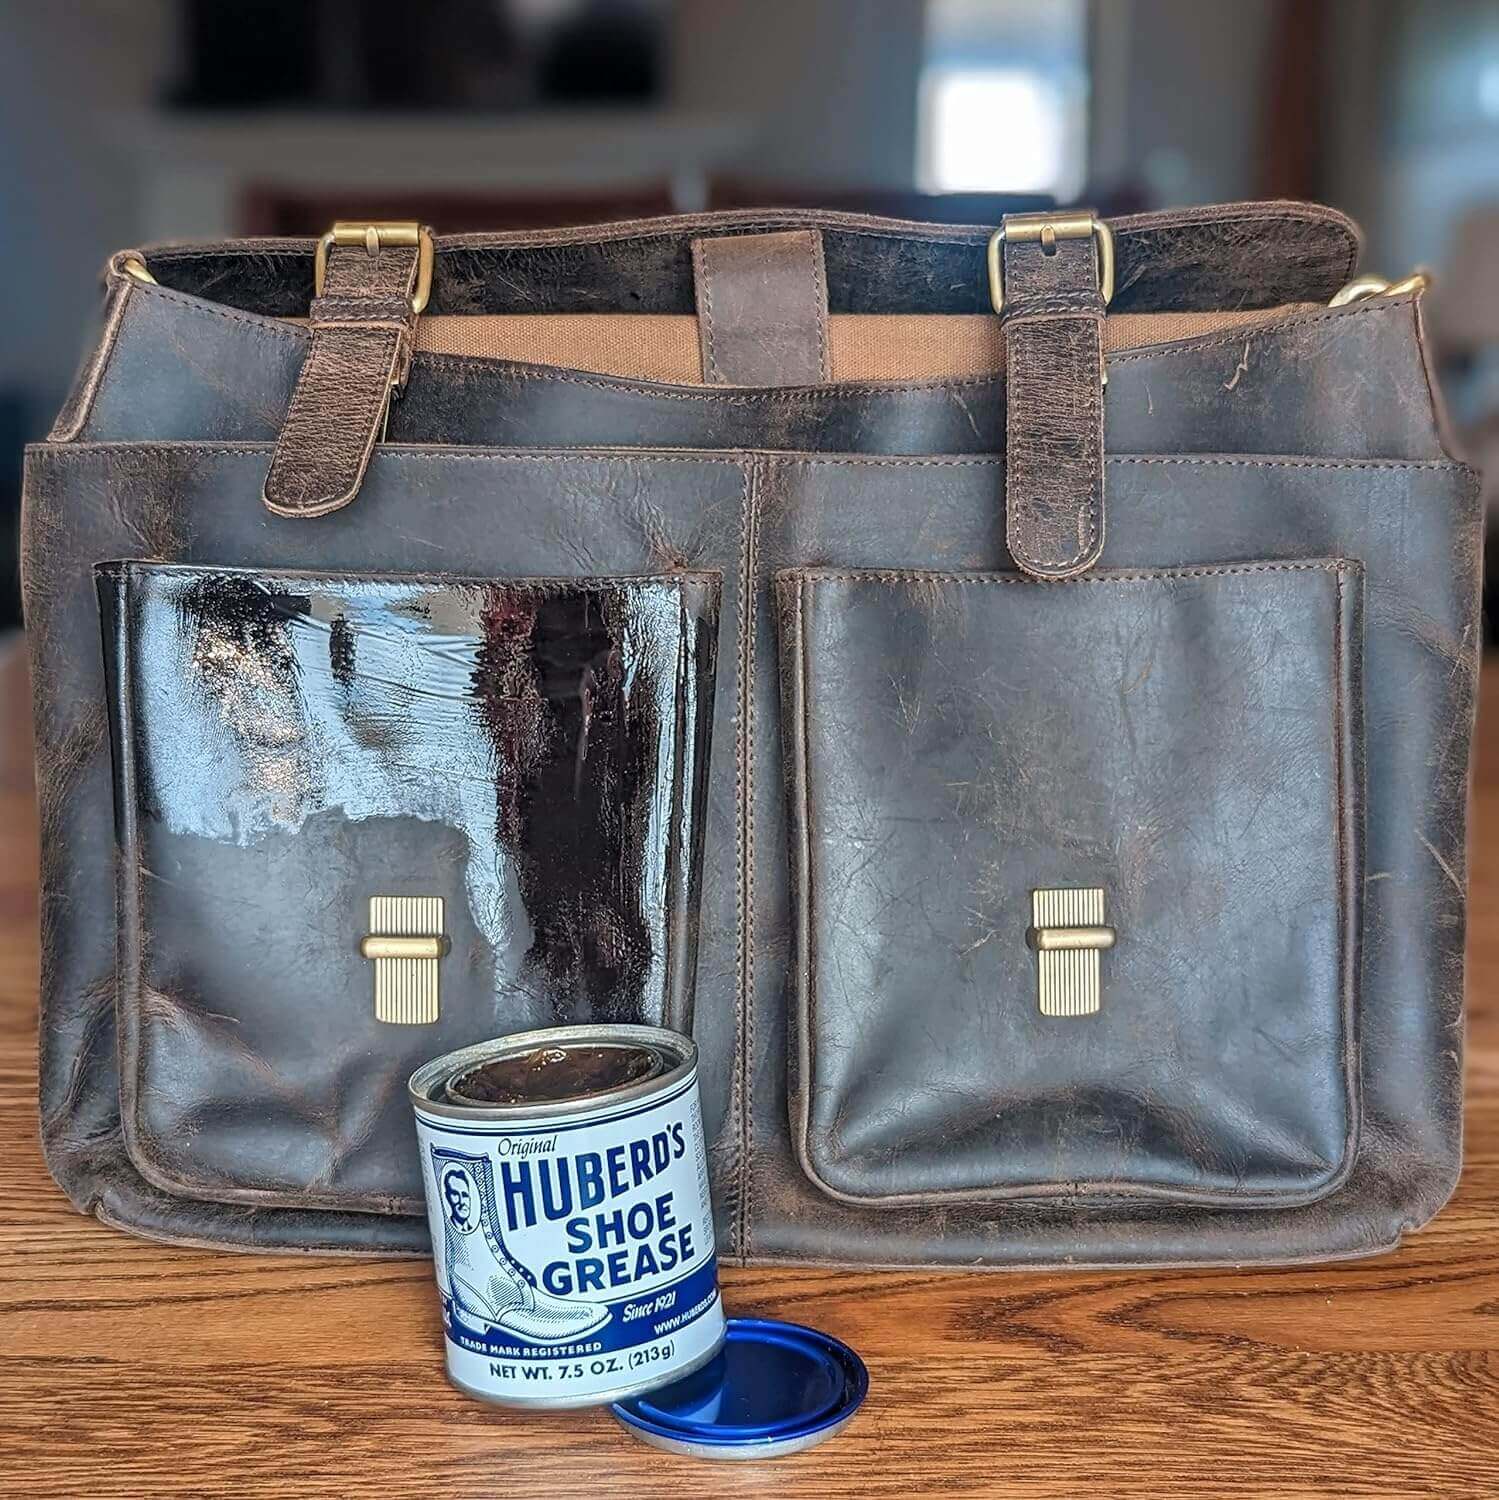 Shop The Latest >Huberd’s Shoe Grease (7.5oz) - Leather conditioner and waterproofer > *Only $24.29*> From The Top Brand > *Huberd'sl* > Shop Now and Get Free Shipping On Orders Over $45.00 >*Shop Earth Foot*